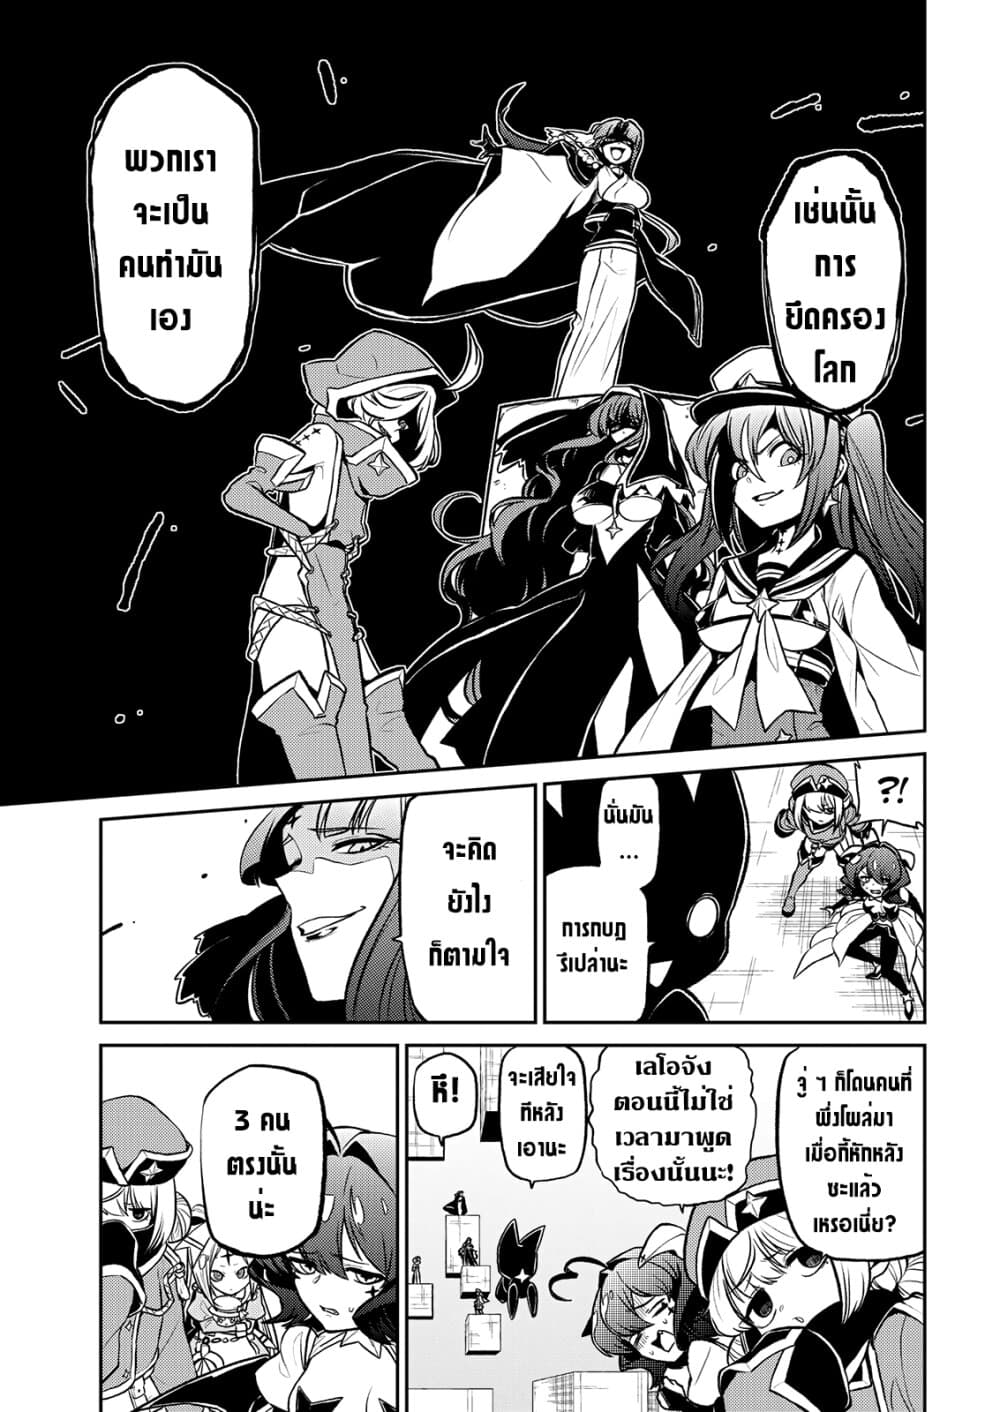 Looking up to Magical Girls 5 (9)